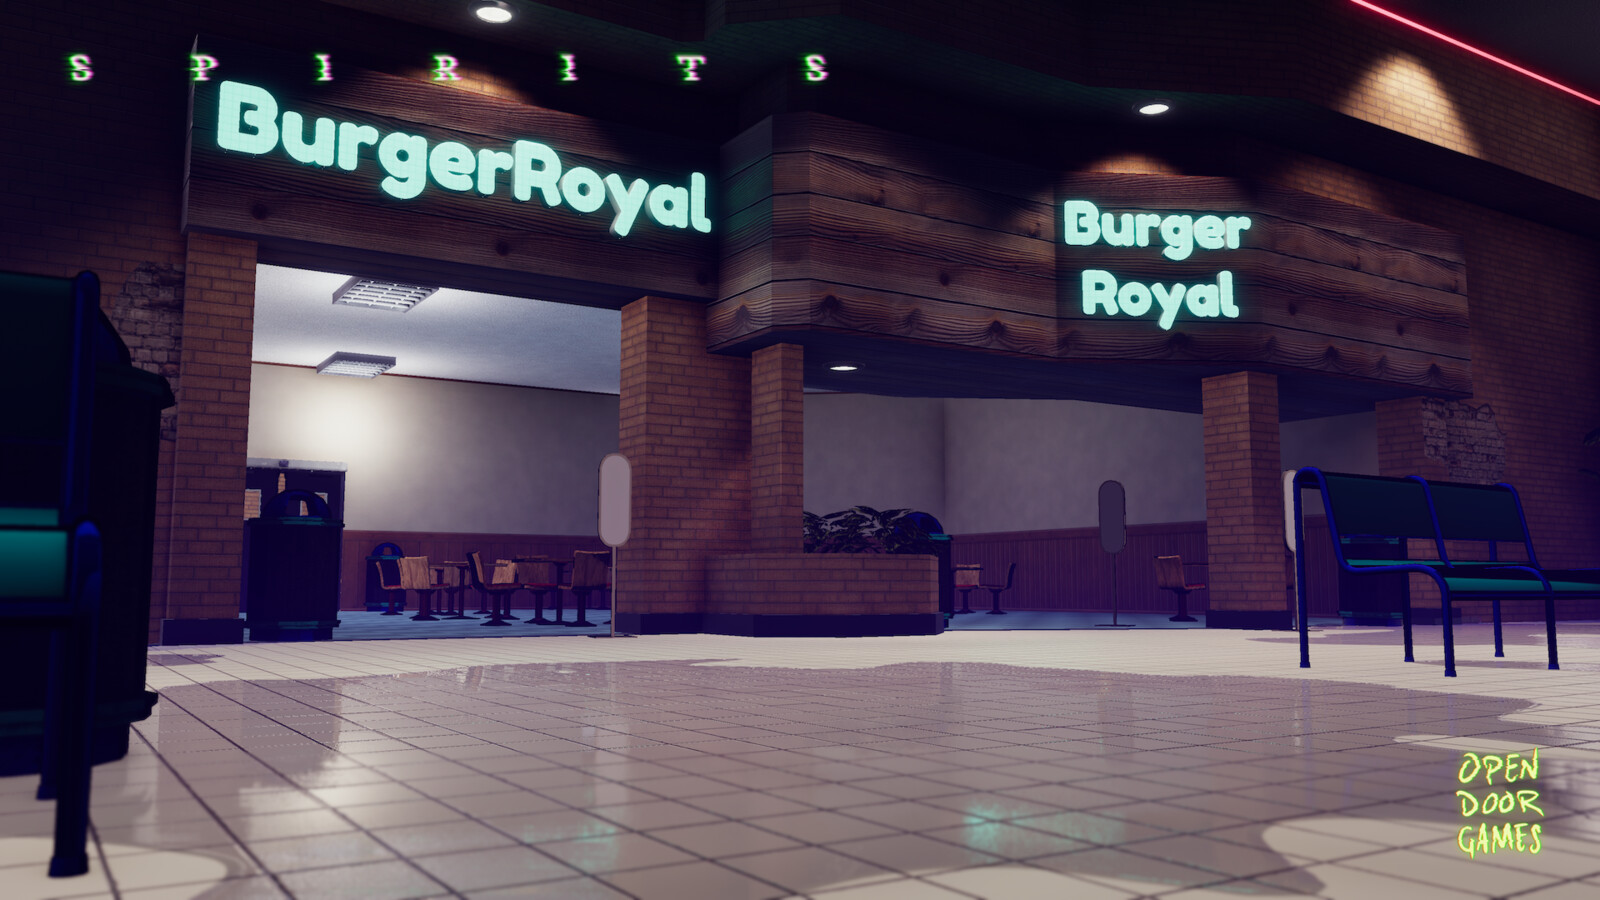 Burger royal is a throwback to classic 80's Burger King